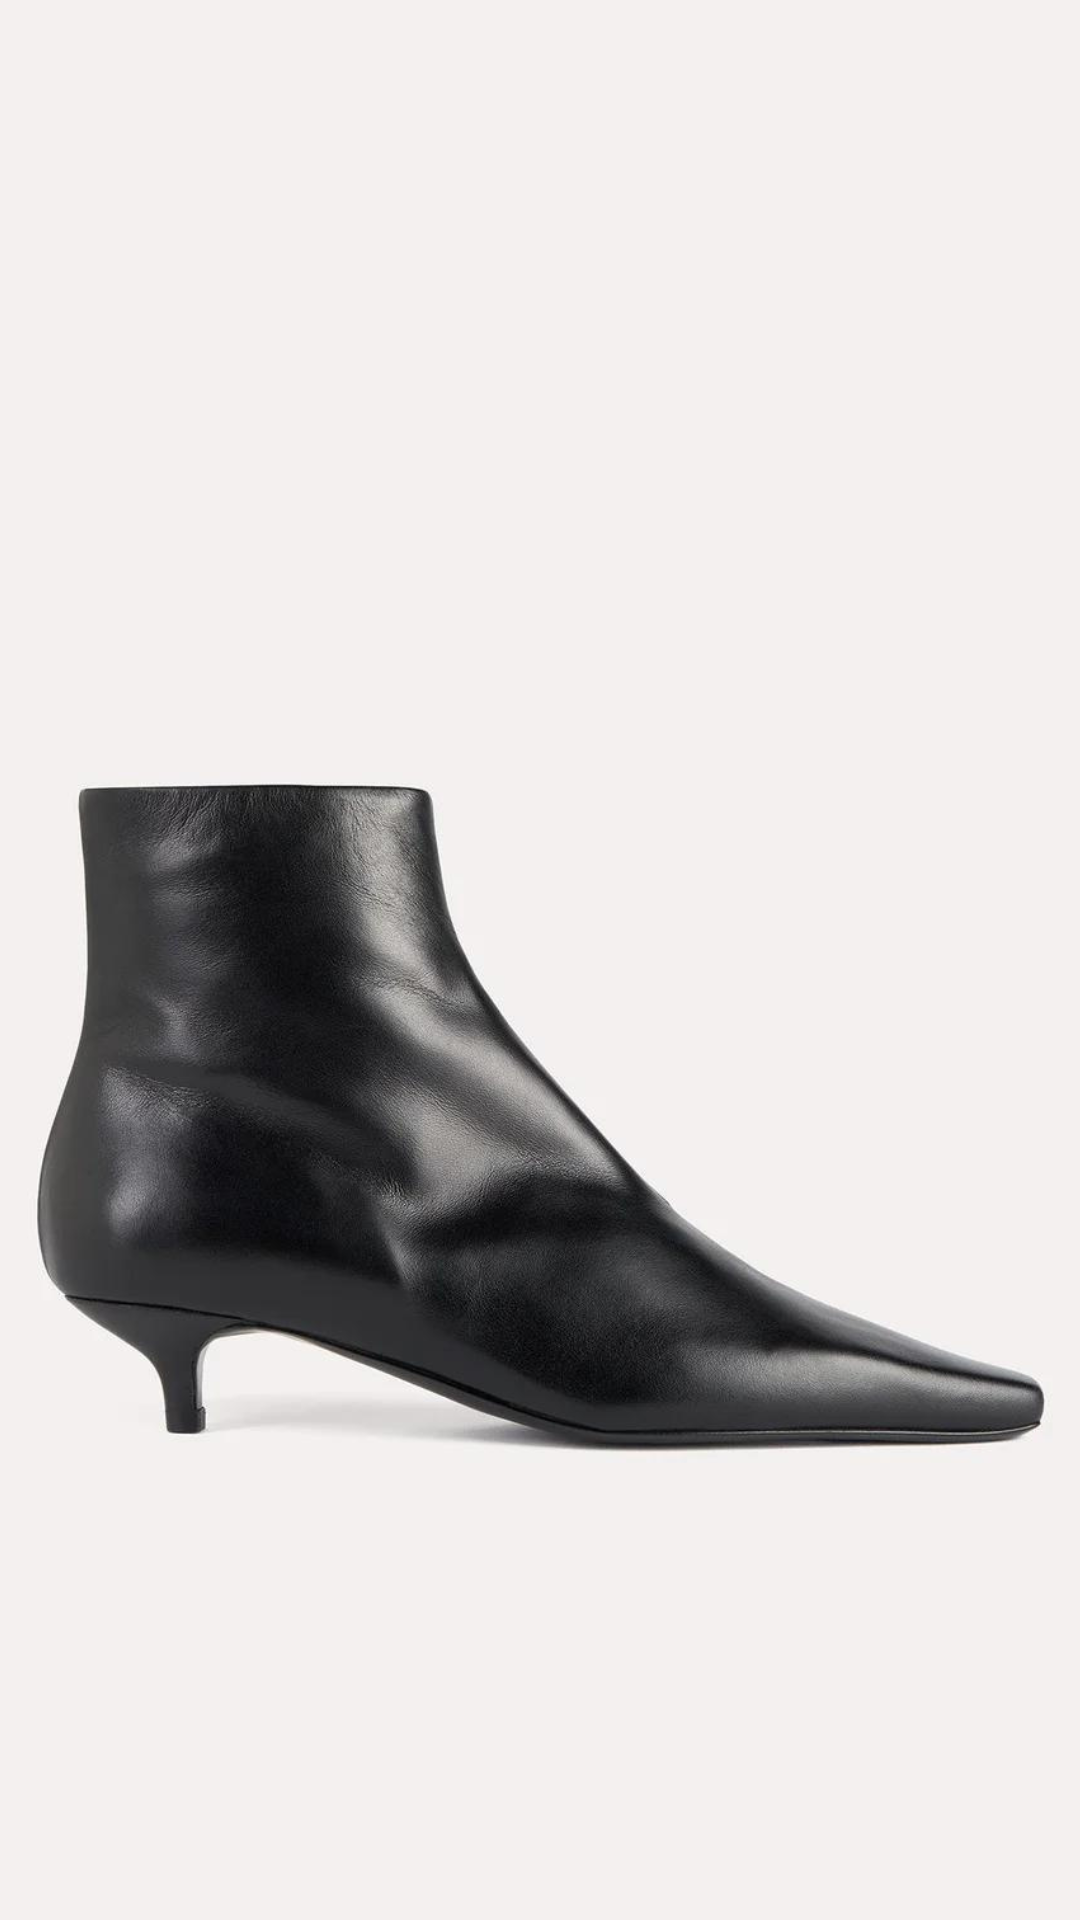 Toteme Slim Ankle Boot